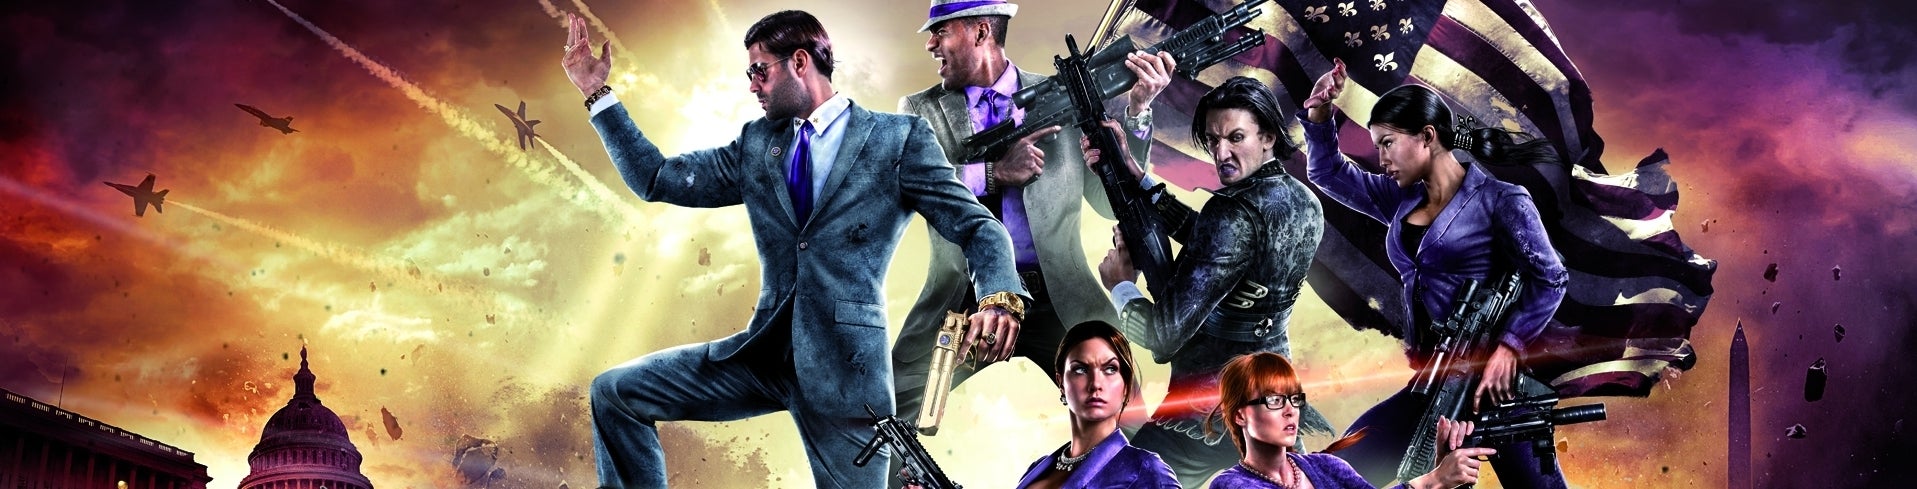 Image for Saints Row 4 review